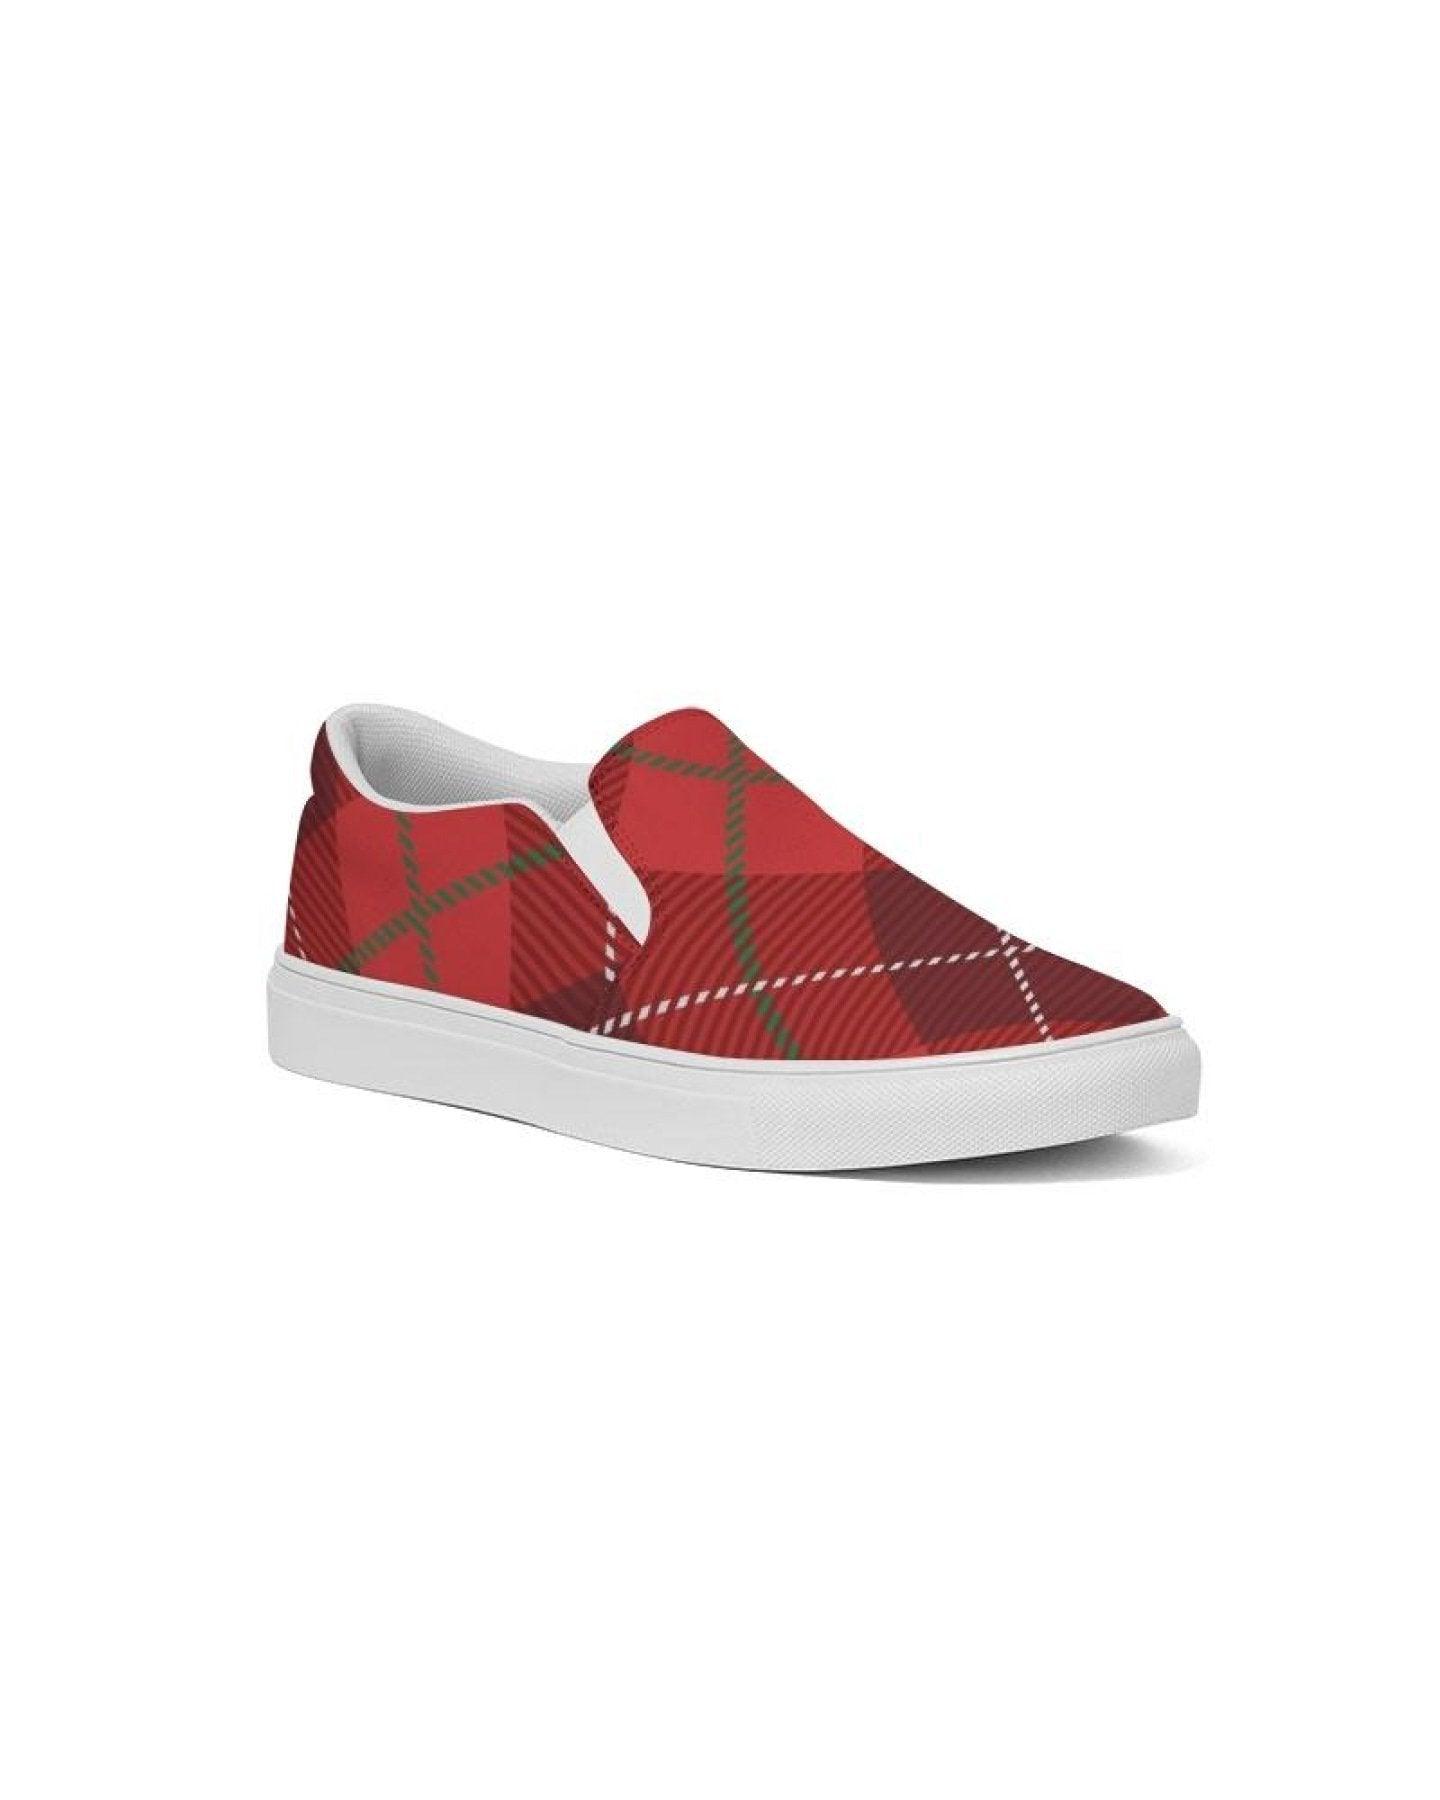 Womens Sneakers - Red Plaid Canvas Sports Shoes / Slip-on - VirtuousWares:Global